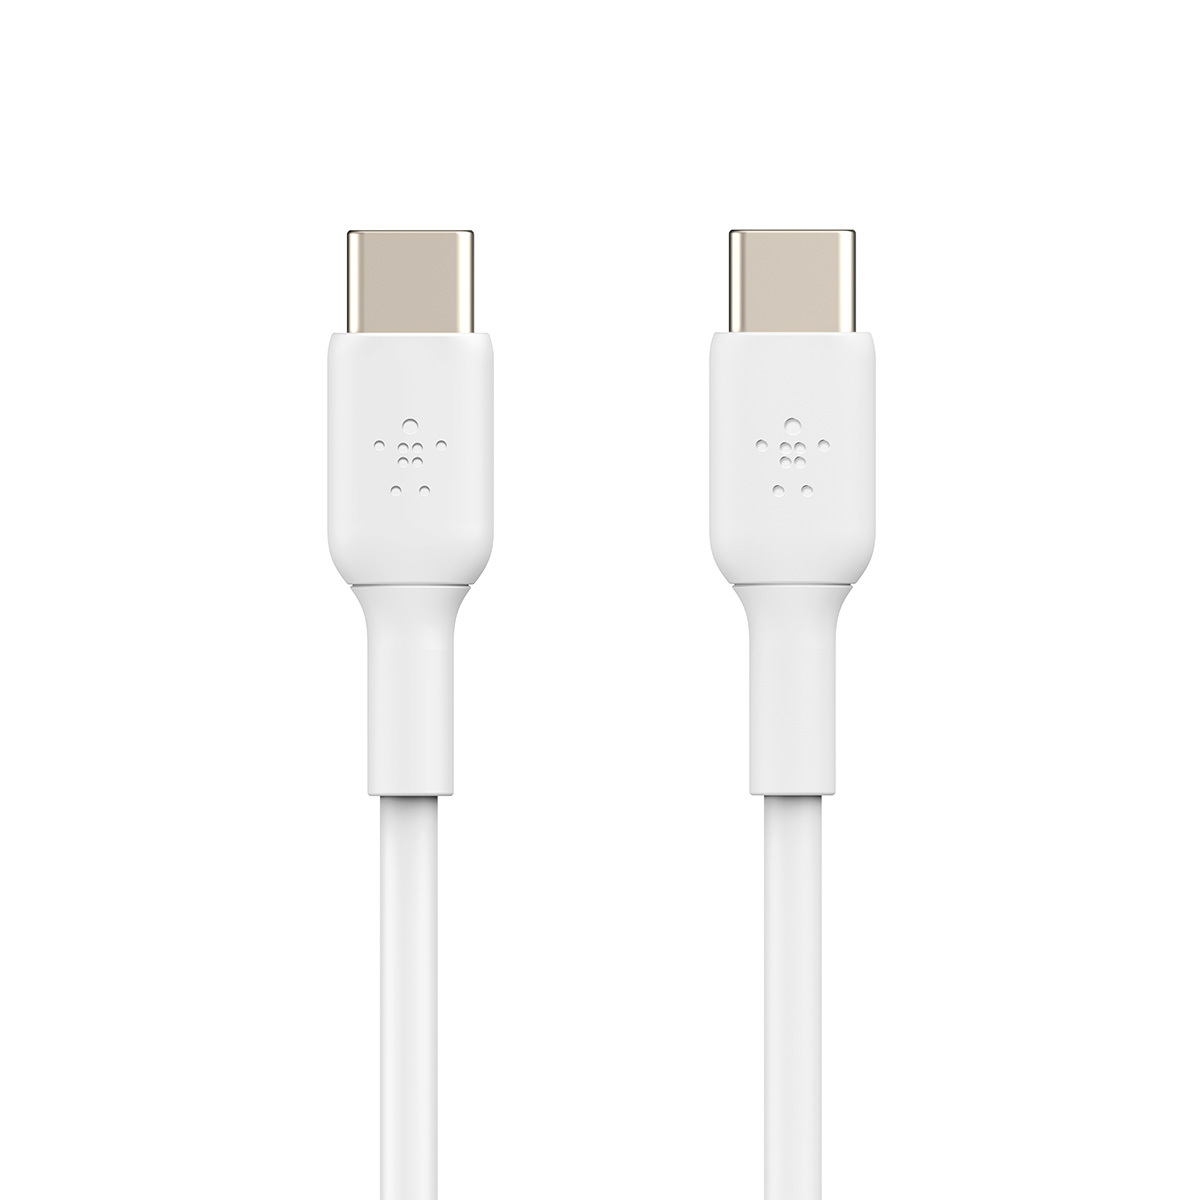 Cable USB Tipo-C a USB Tipo-C Belkin Boost Charge 1 metro Blanco